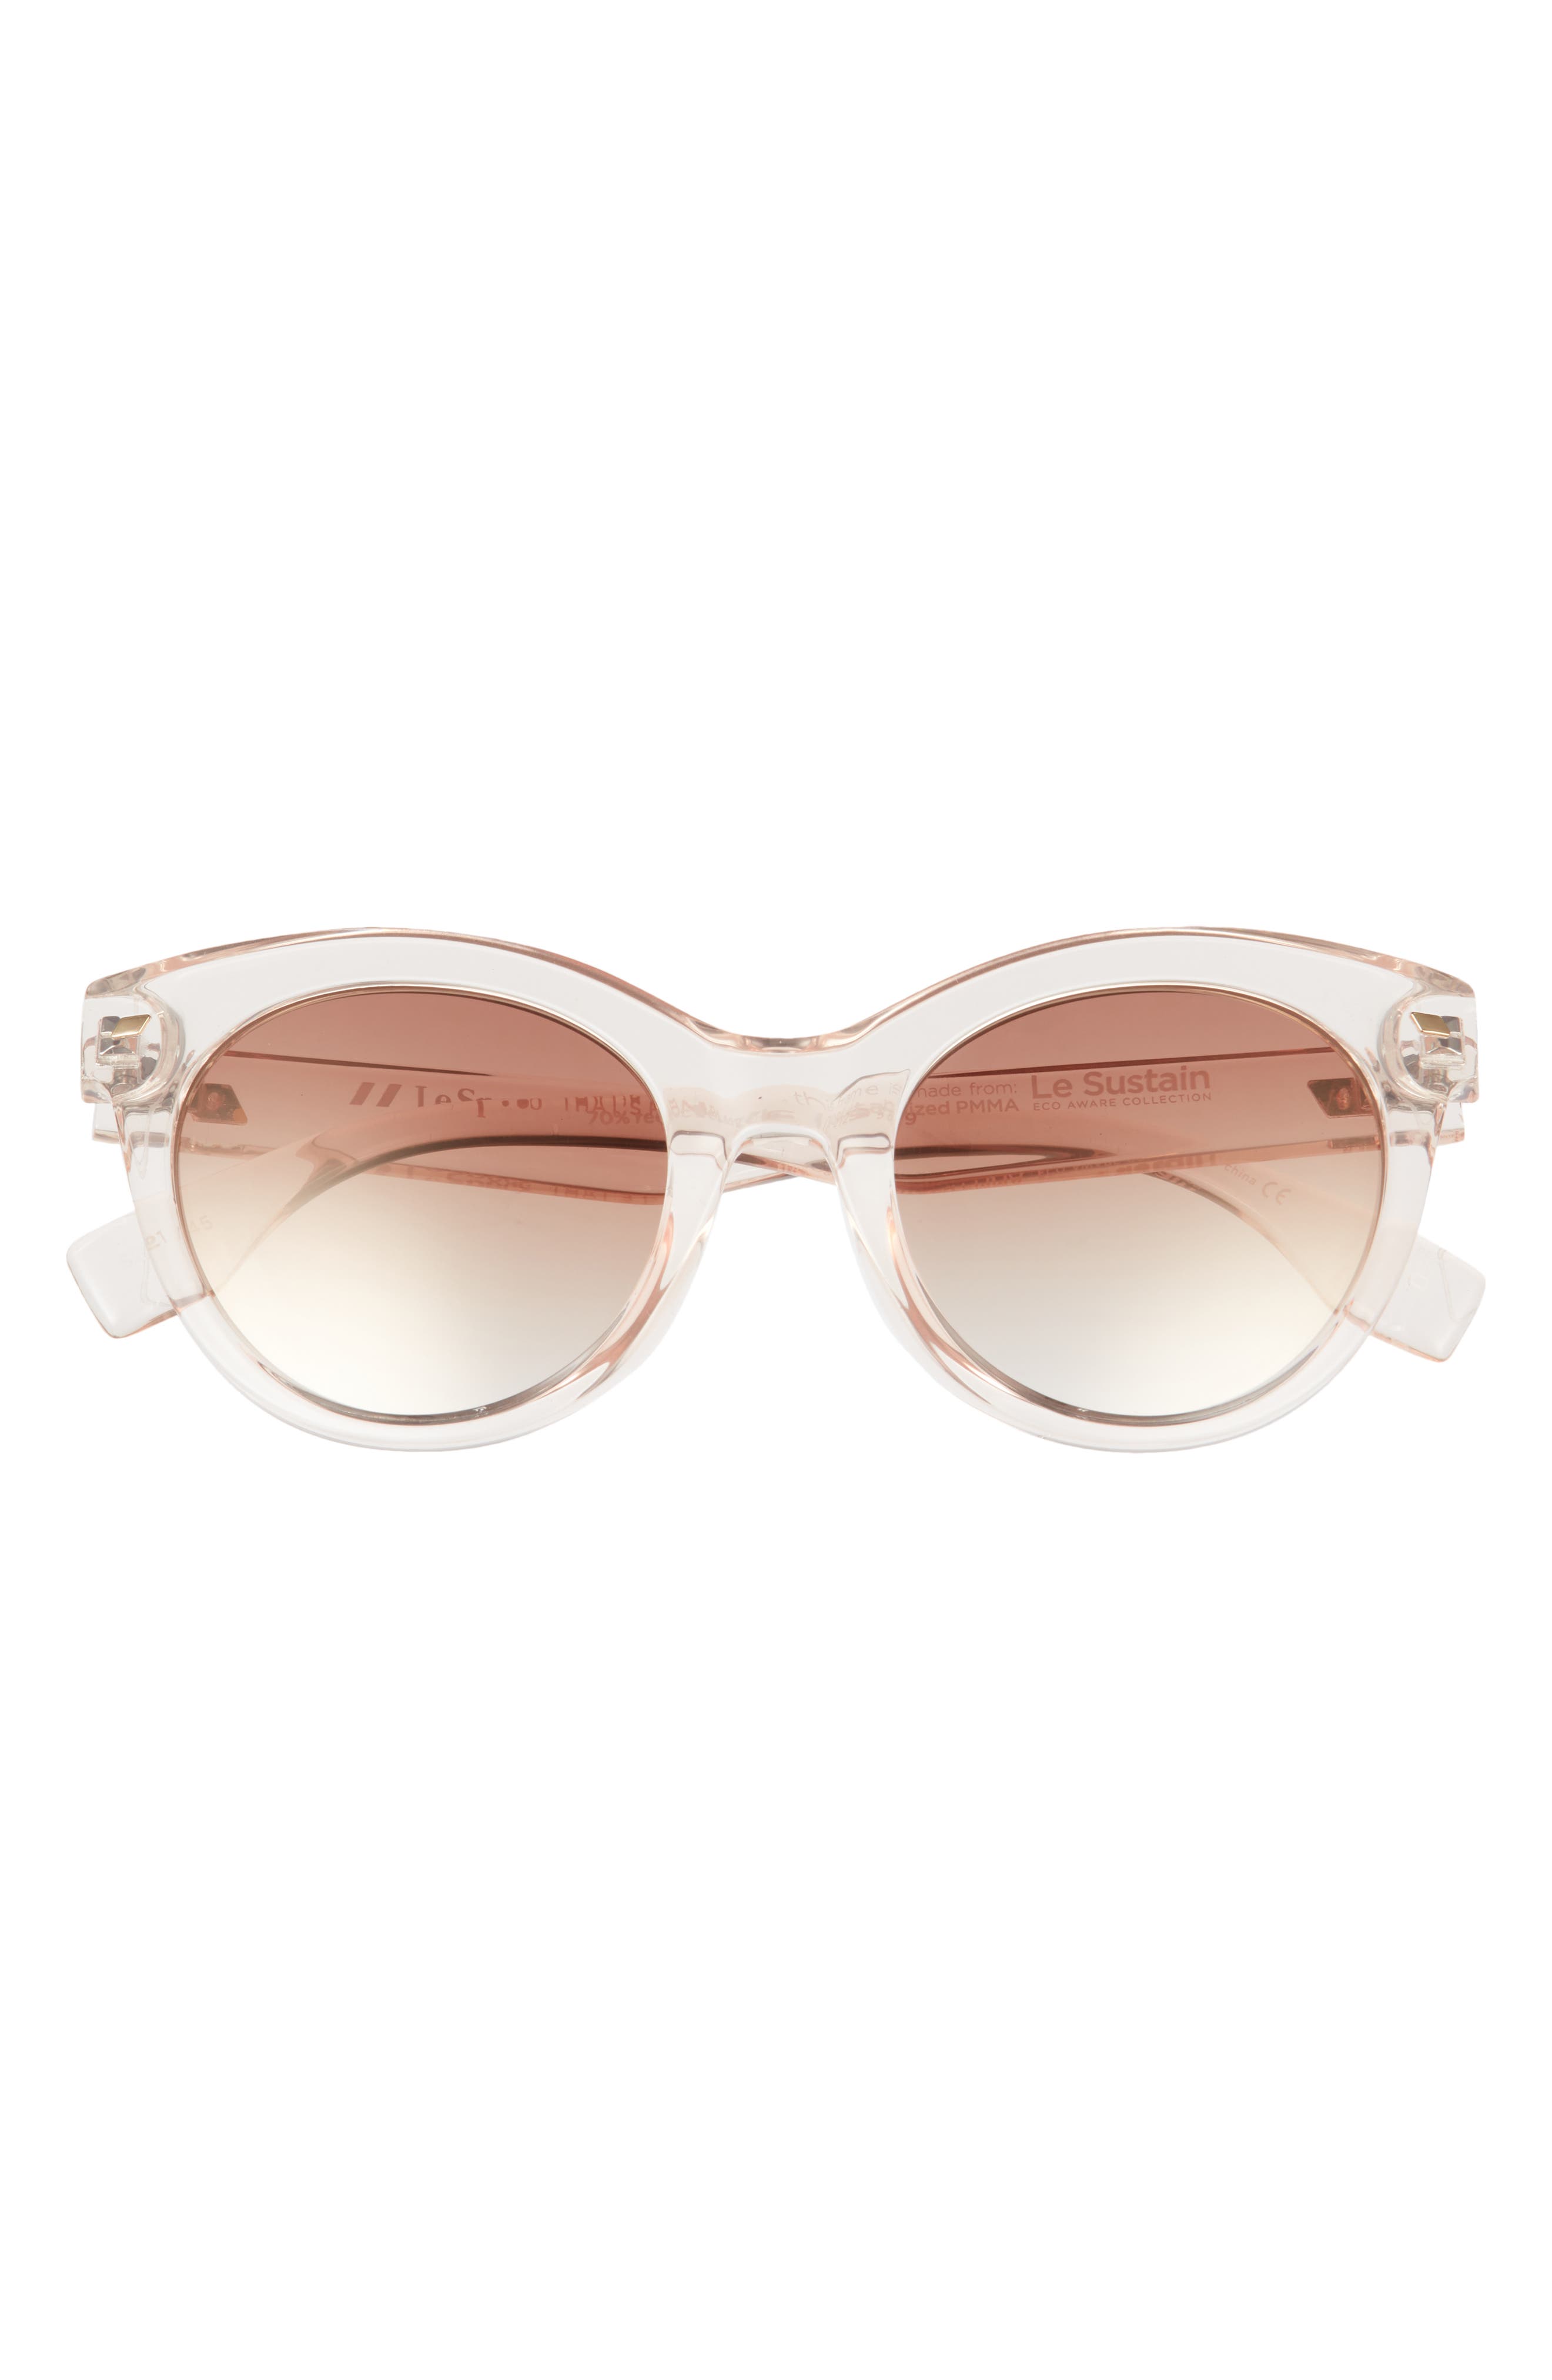 Le Specs That's Fanplastic 52mm Round Sunglasses in Nougat /Brown Grad Gold Flash at Nordstrom